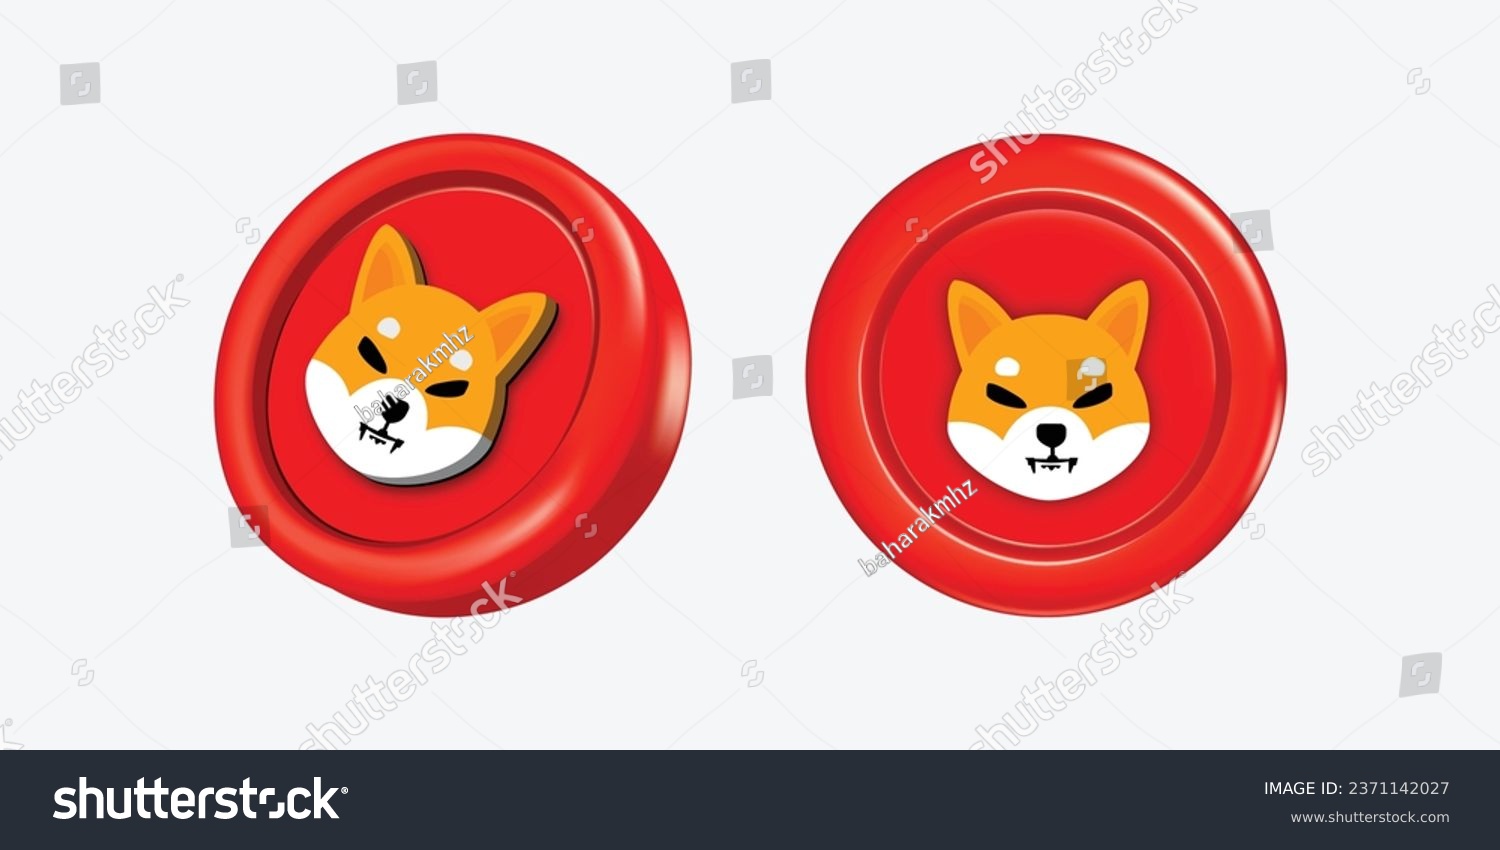 SVG of 3d Shiba Inu Cryptocurrency Coin (SHIB) on white background. Vector illustration svg